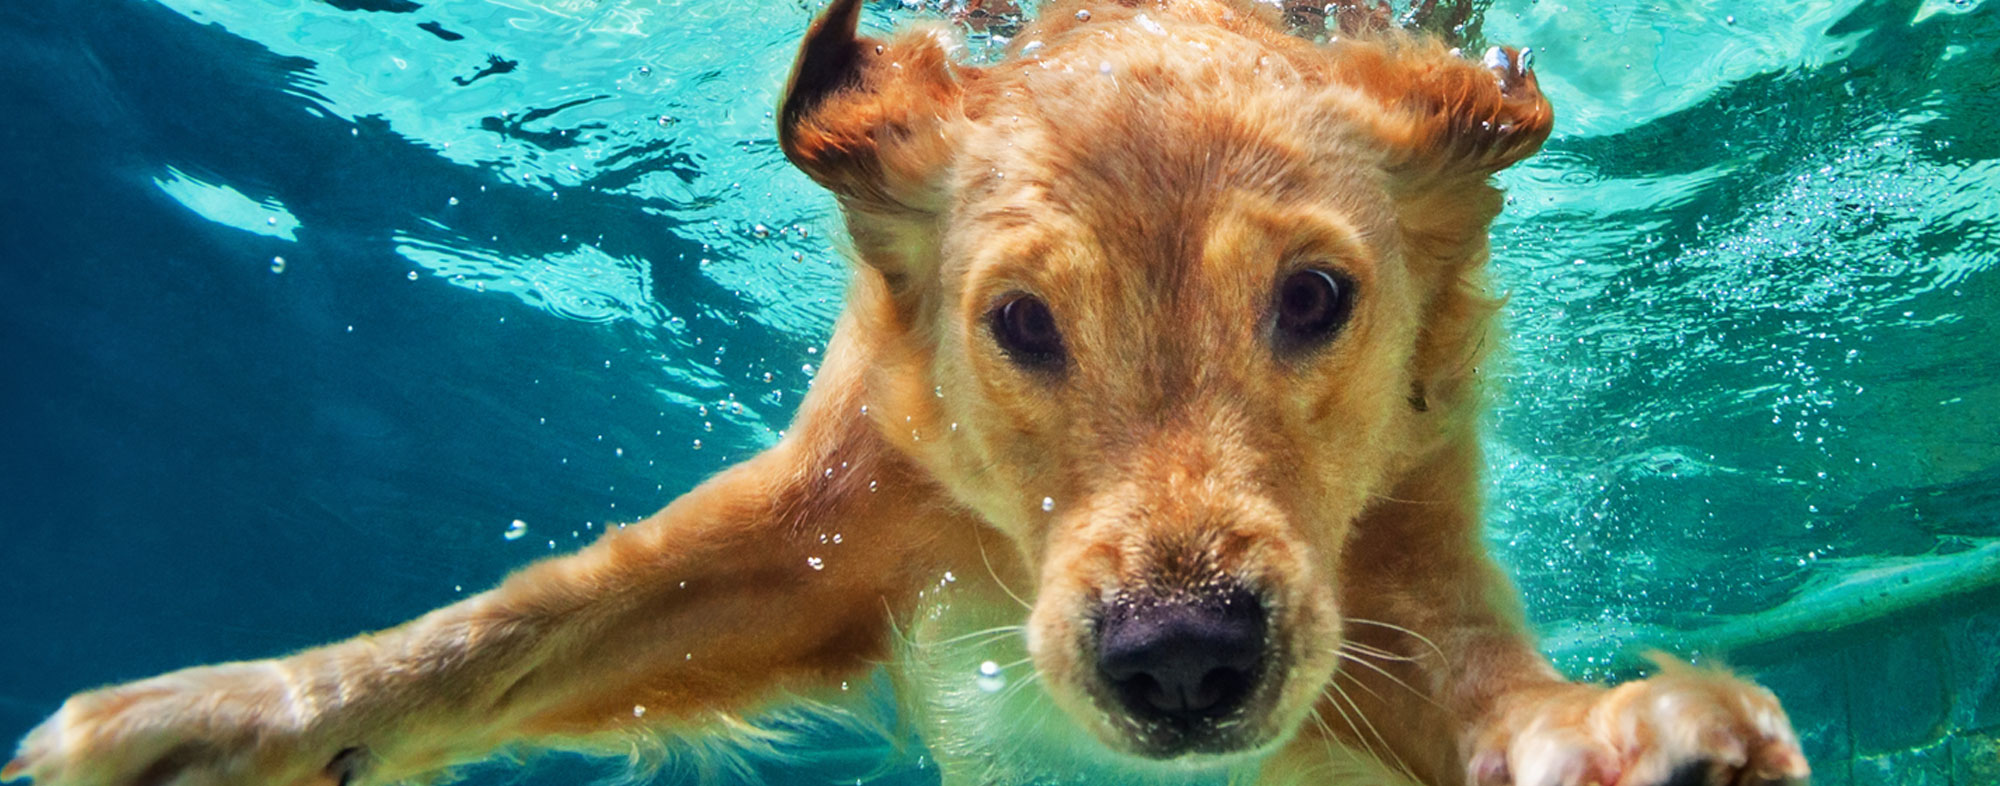 Give your dog plenty of exercise, including opportunities to swim